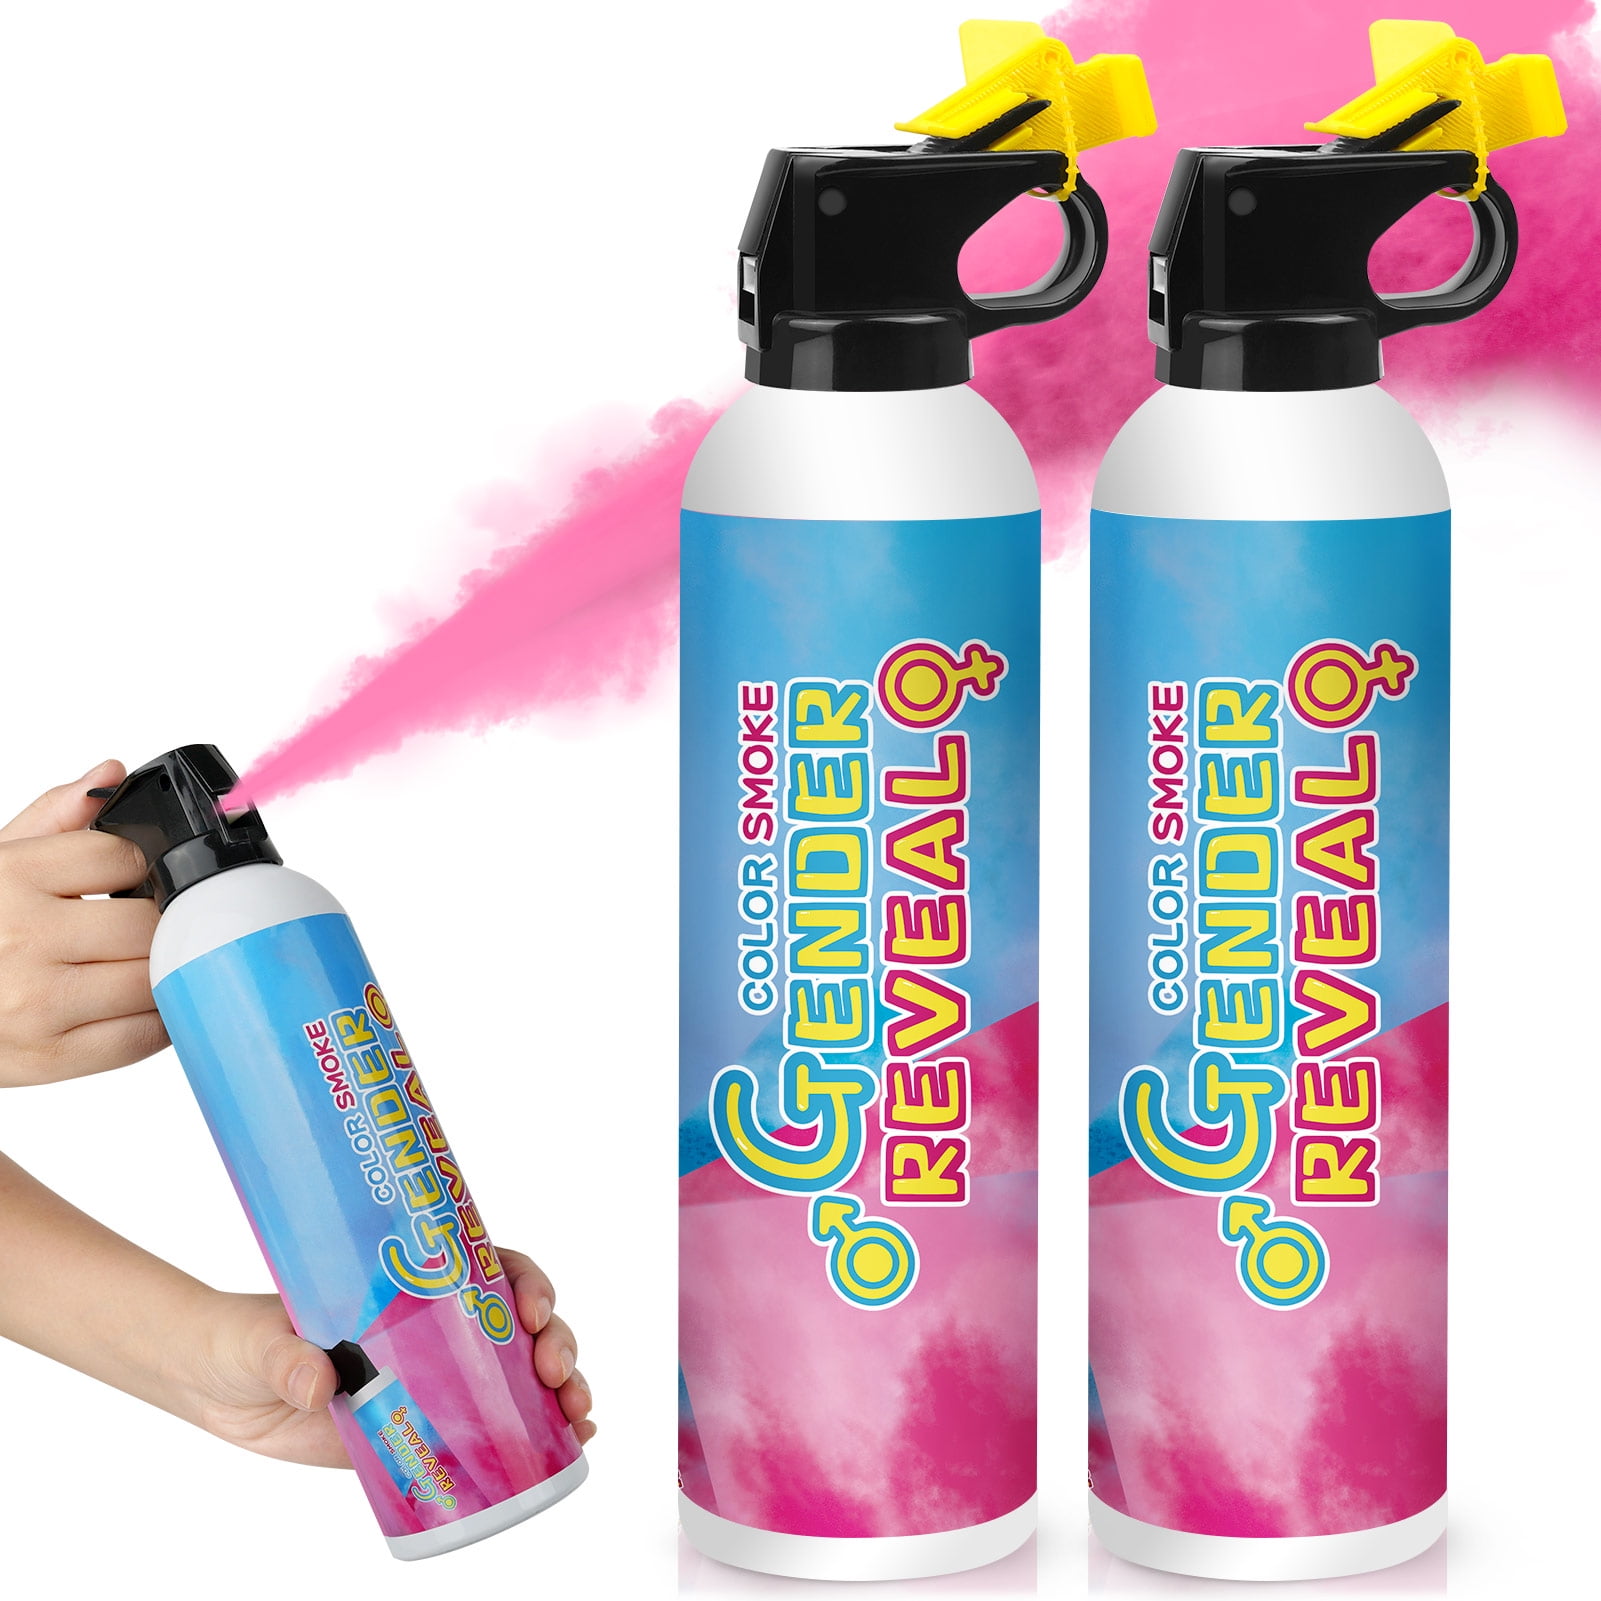  Hawwwy Colorful Powder for Holi Festival, Burnout Girl/Boy Gender  Reveal Powder Announcement tannerite, Motorcycle Exhaust Car Tires  Pink/Blue, Gender Reveal Fireworks : Home & Kitchen